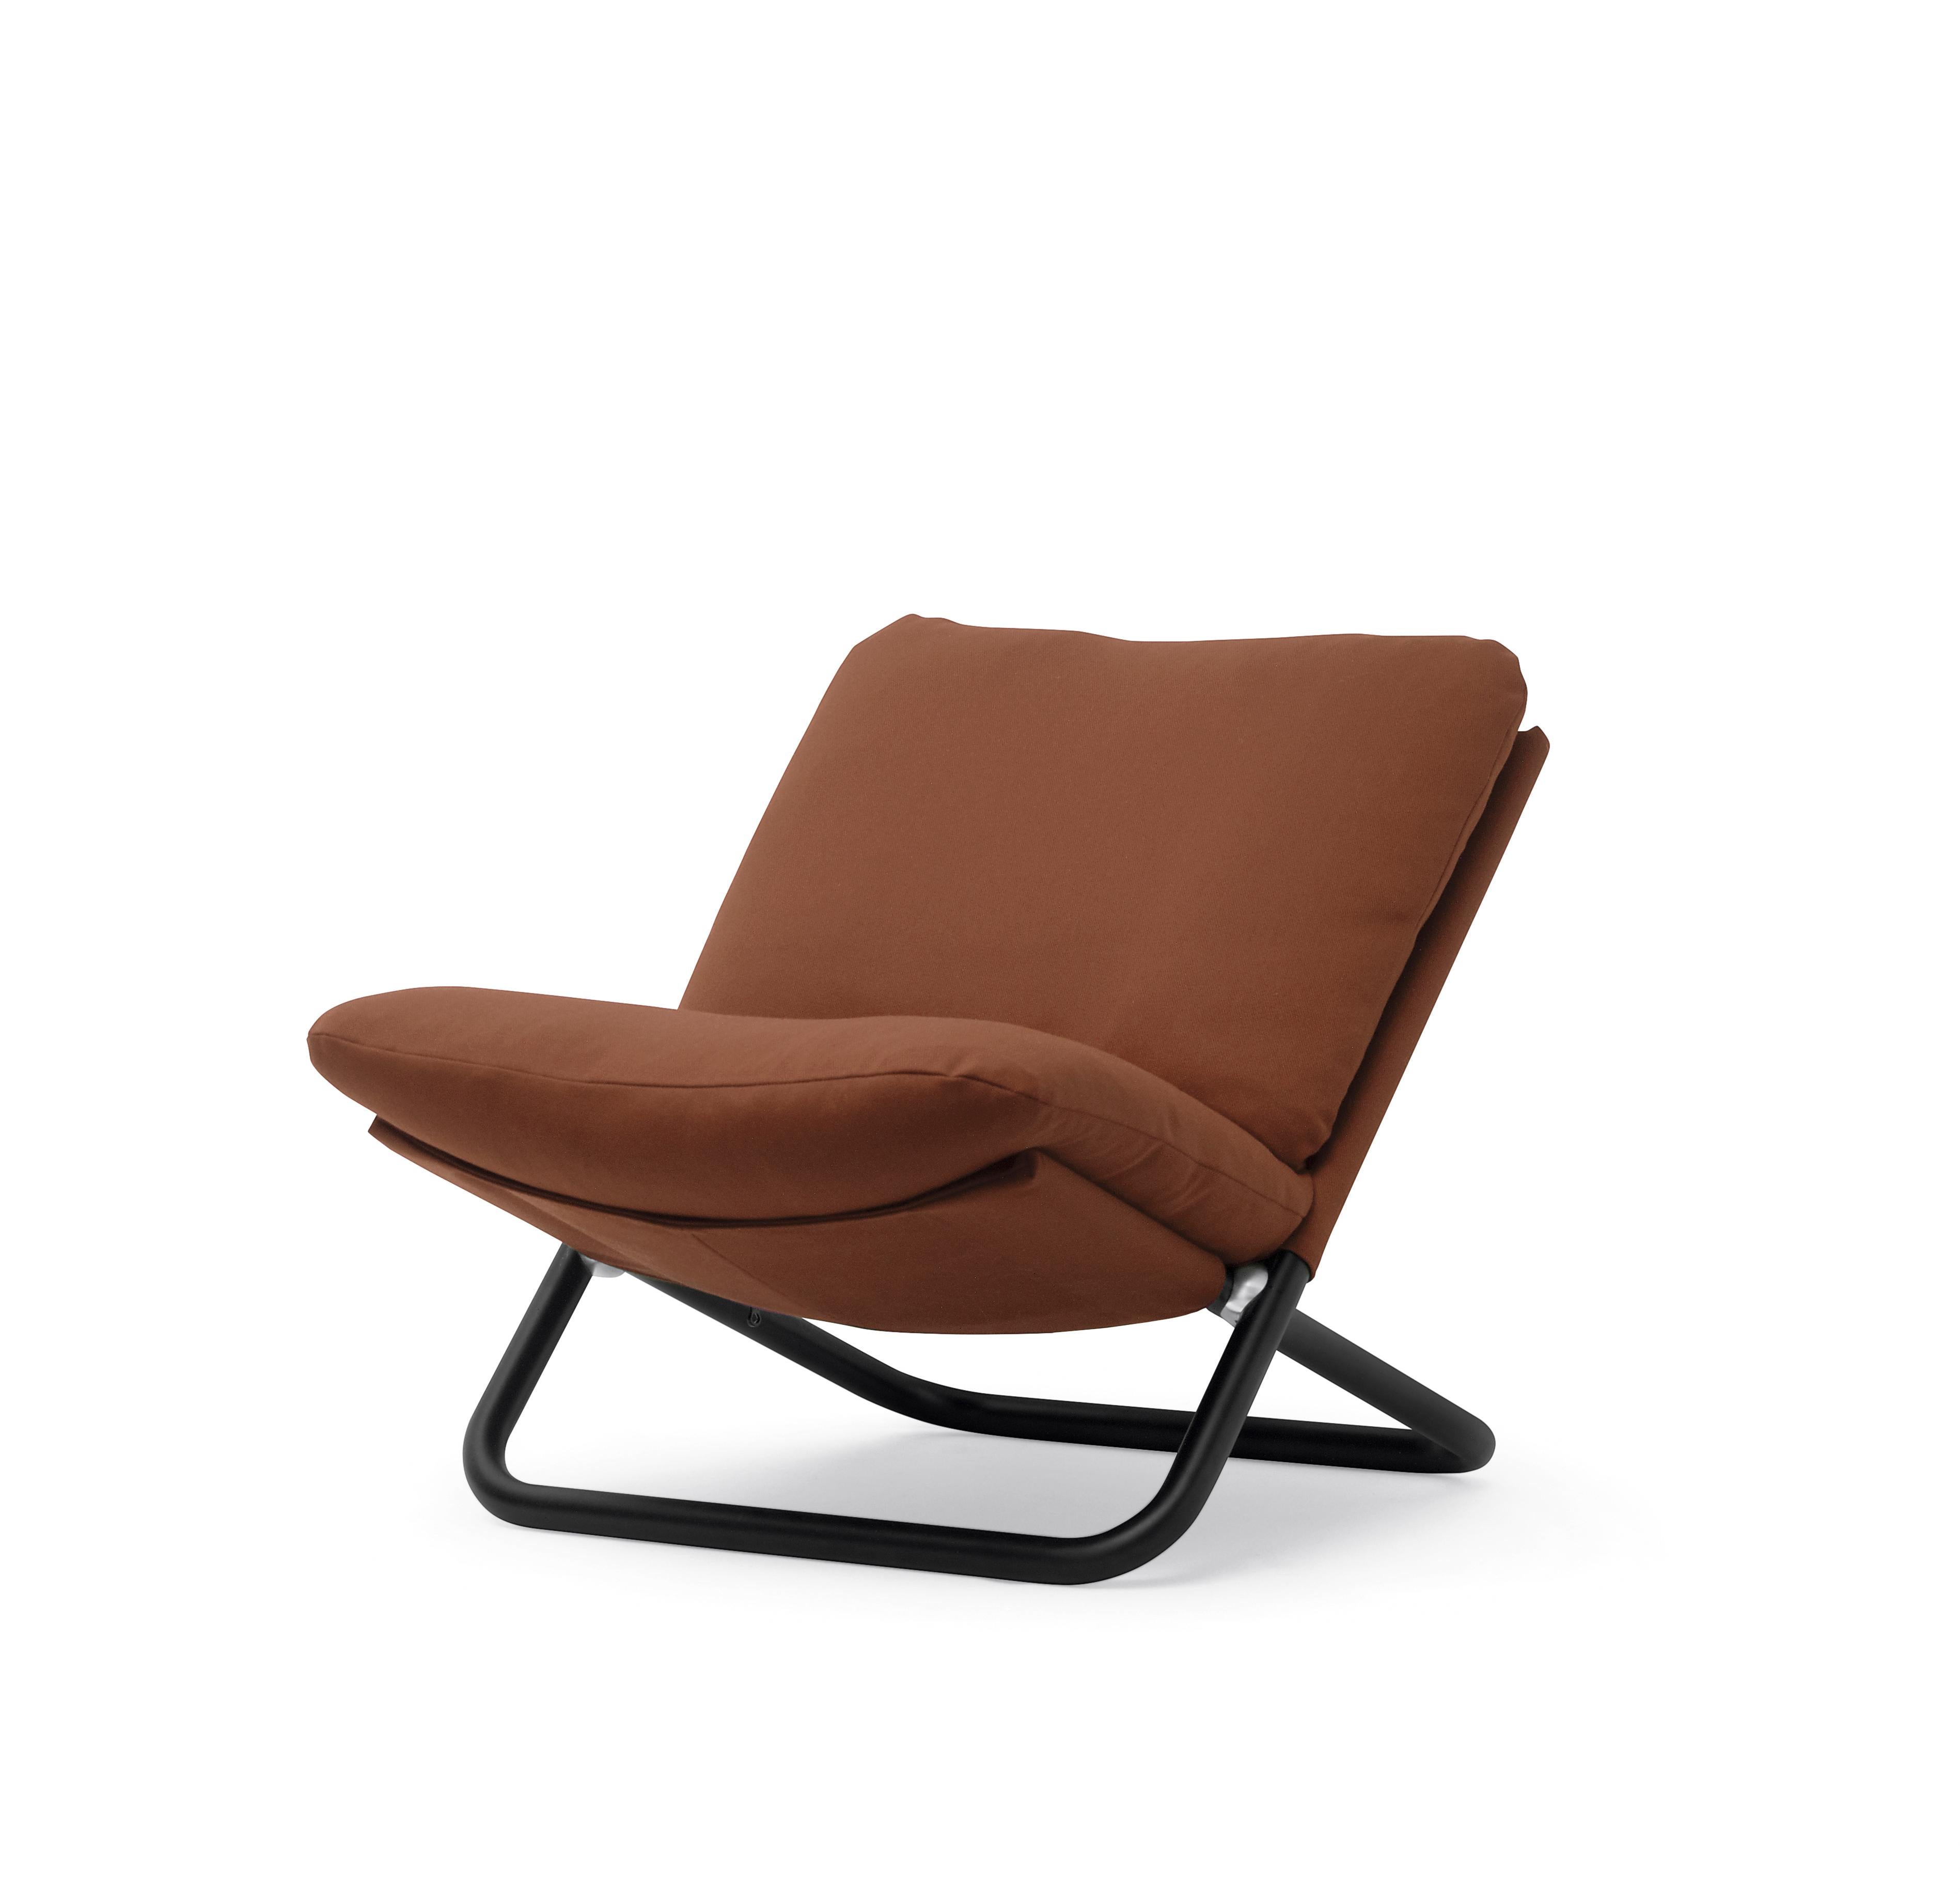 The seat was born from a very simple idea: two tubes bent into a “U” shape and connected together by a joint.

Additional information:
Materials: Upholstered seat with Black Metal Frame
Color: Steelcut 2 Col. 655,T4
Structure: Metal, Lacquered